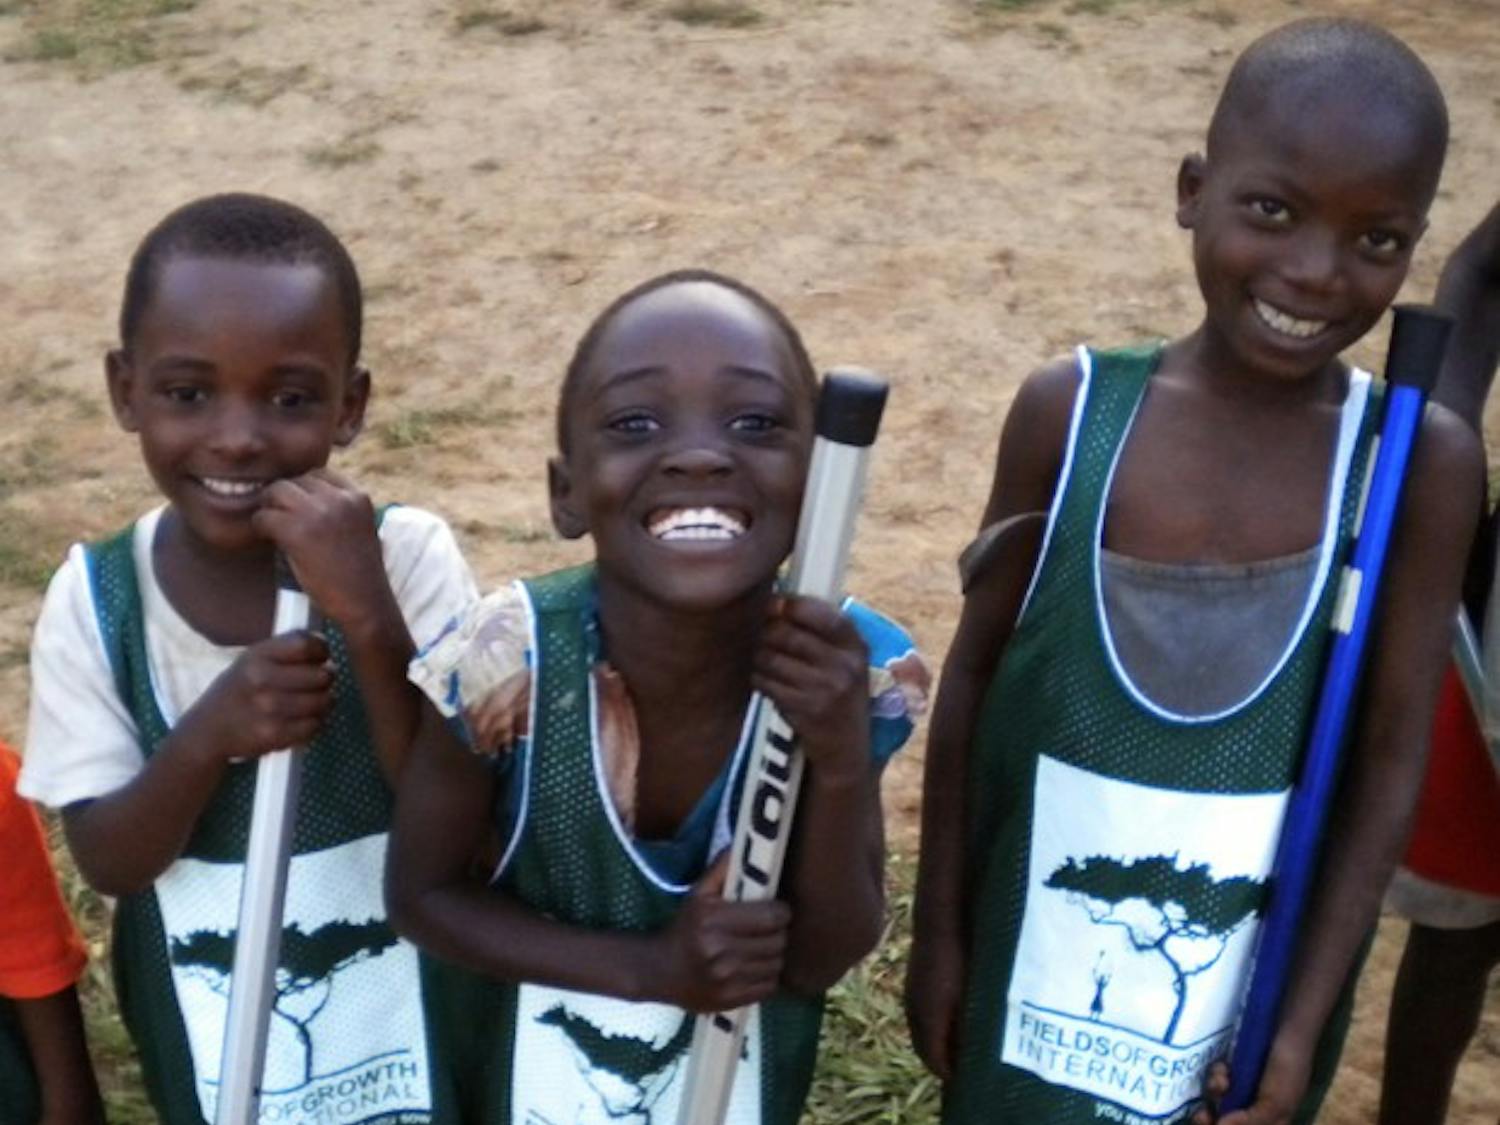 Photo: UNC senior traveled to Uganda to spread lacrosse and charity (Courtesy of Kevin Dugan)